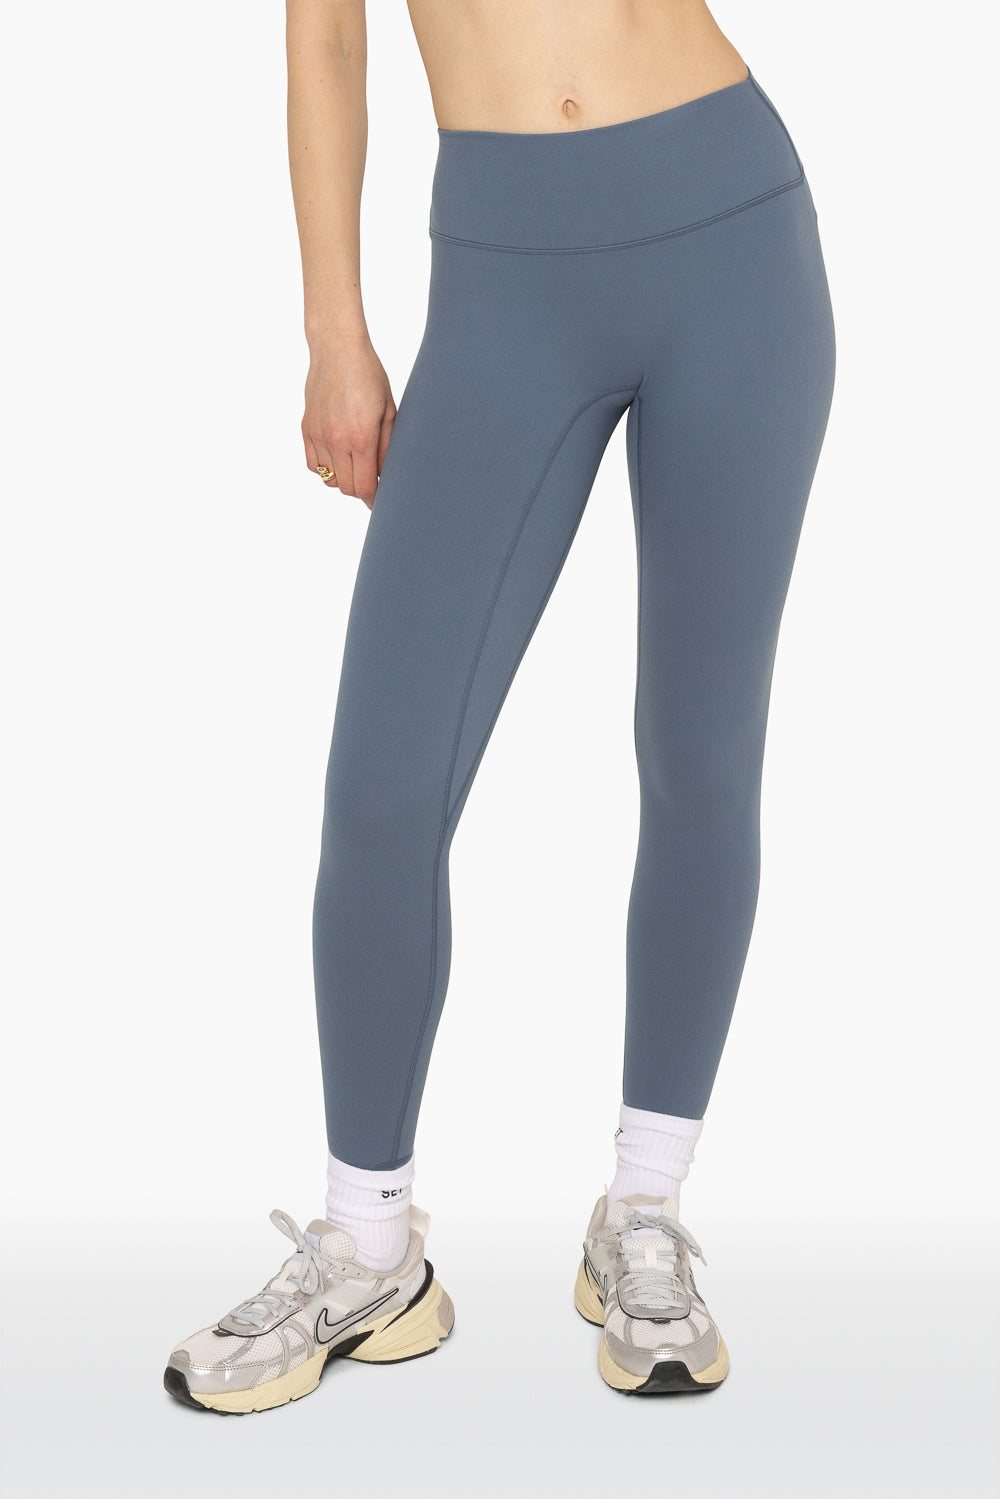 FORMCLOUD™ LEGGINGS - MINERAL Featured Image